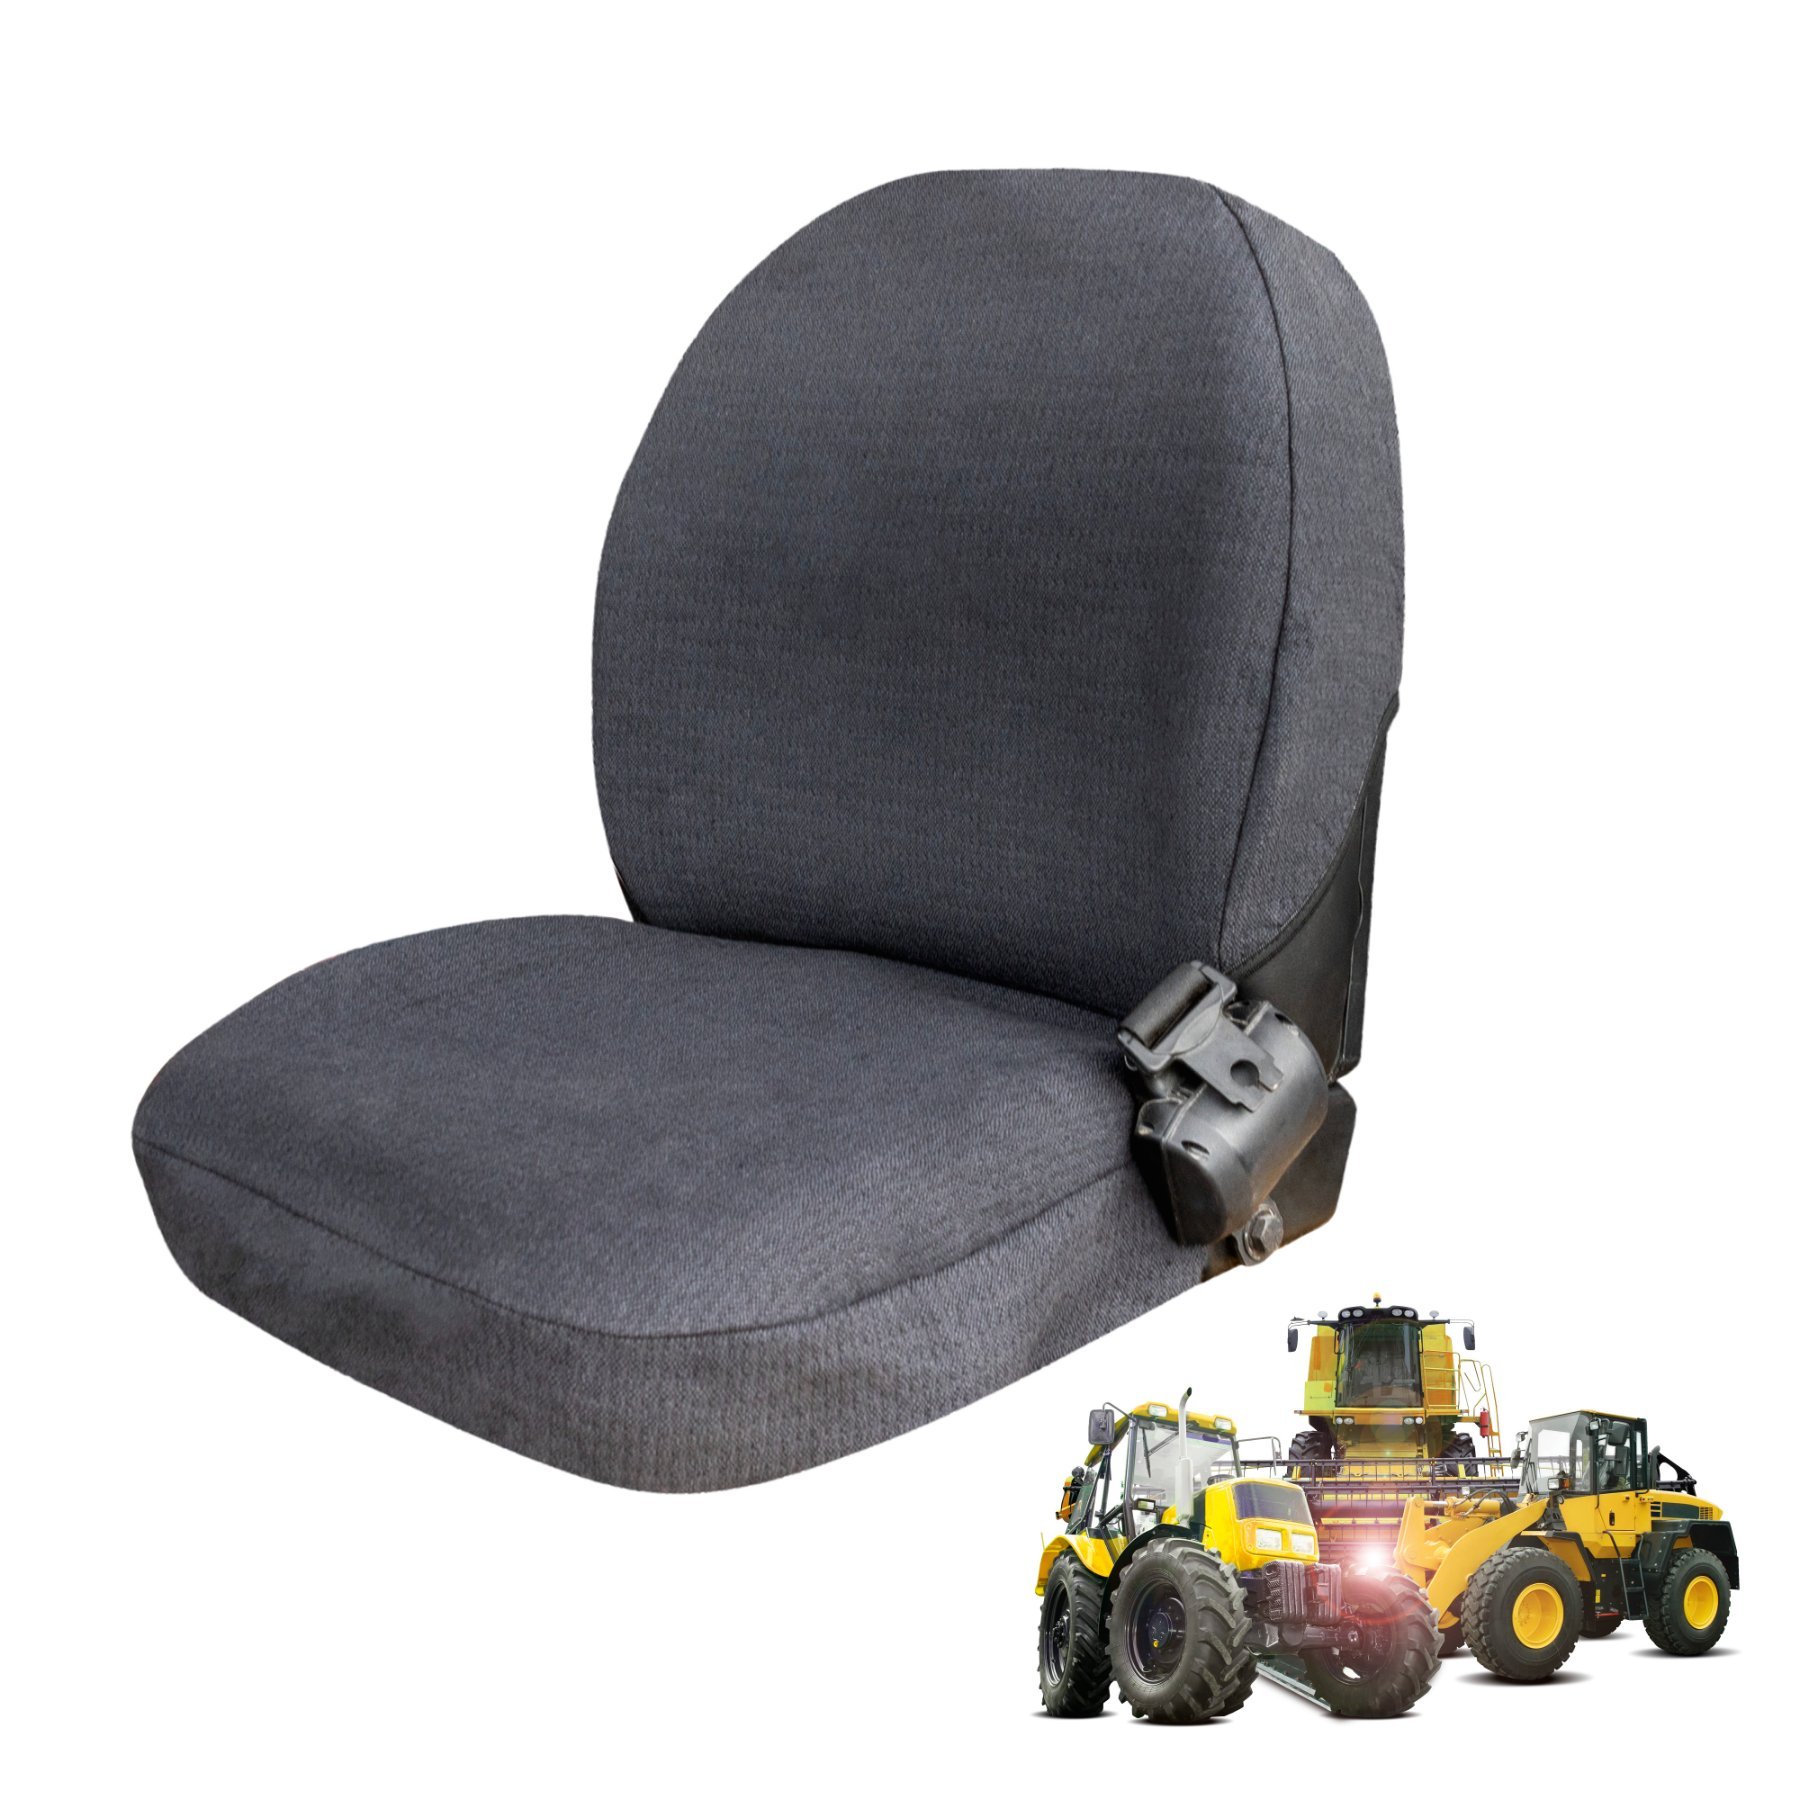 Semi-fit Seat cover for tractors and construction machinery - size 7